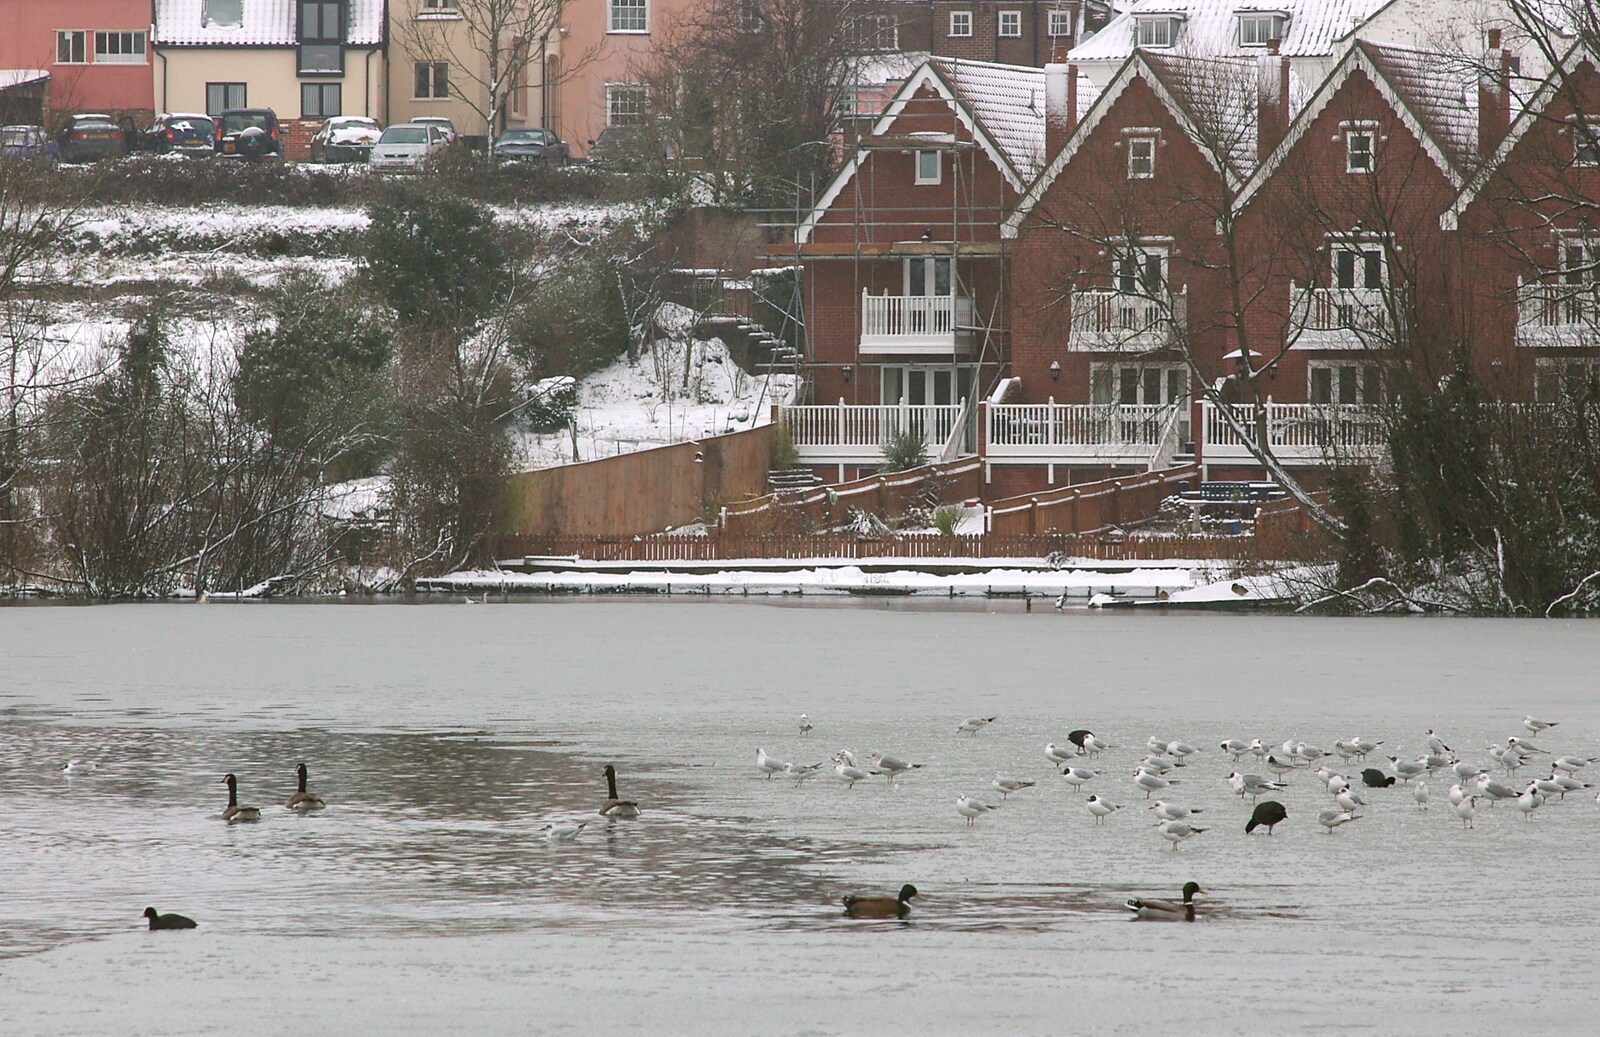 Seagulls stand on the frozen Mere from Wendy Leaves "The Lab" and a Snow Day, Cambridge and Brome - 25th February 2005